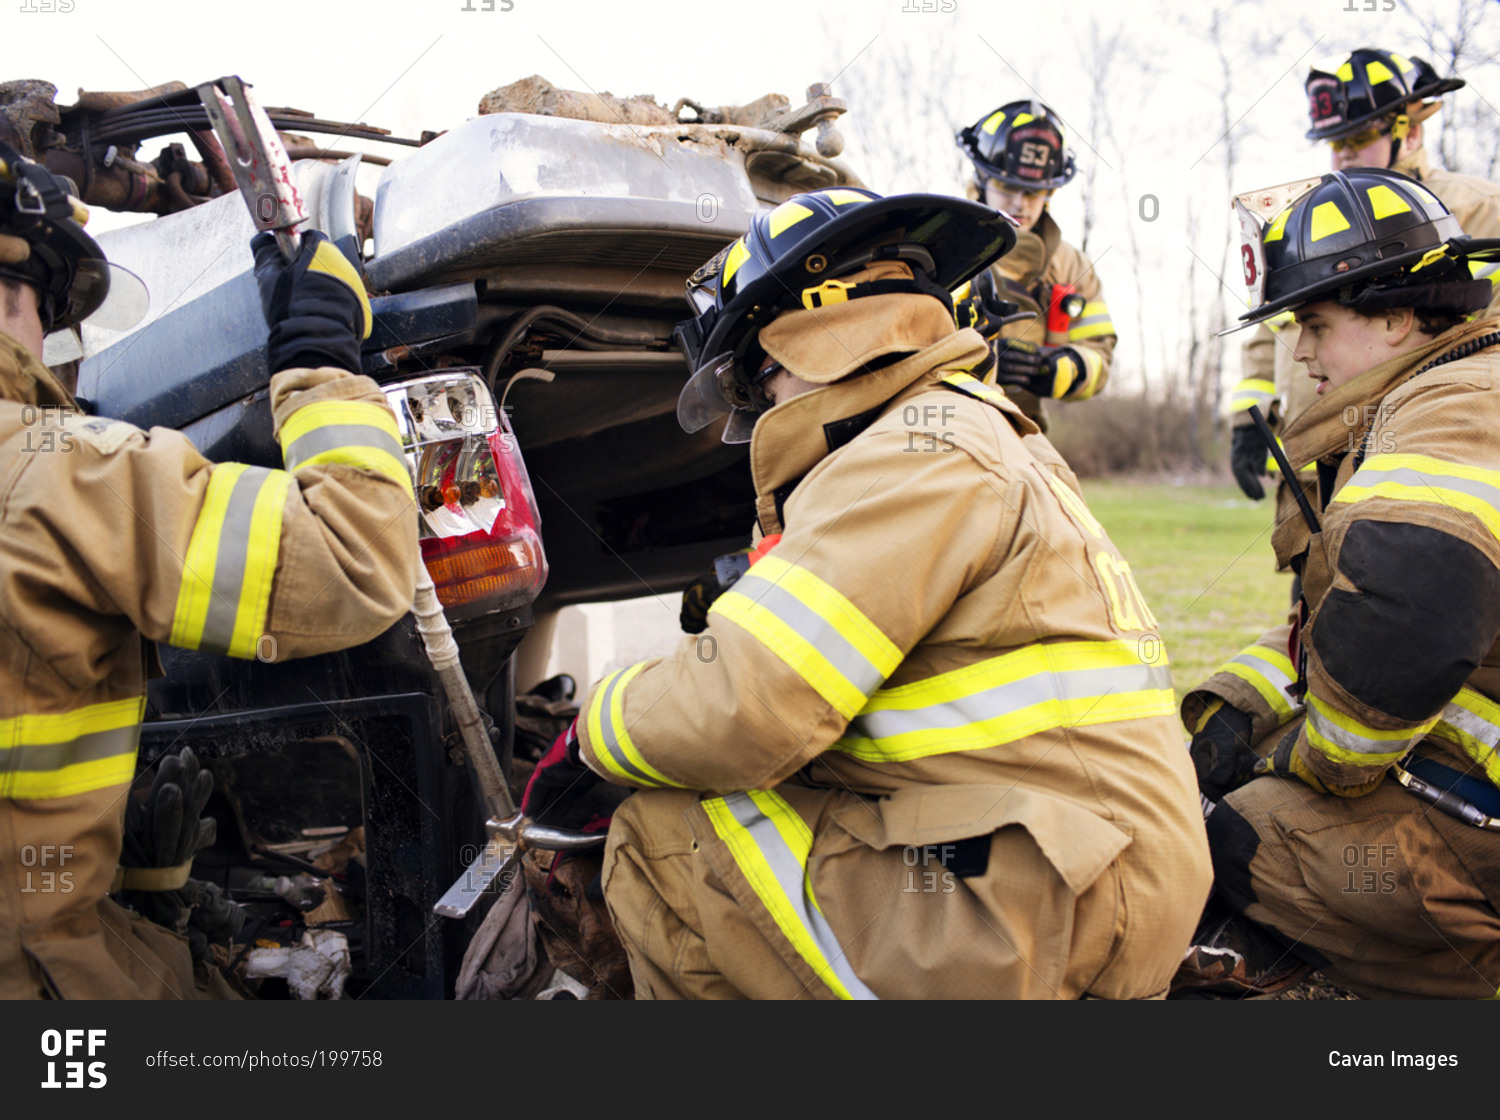 Firemen examine the wreckage of a car